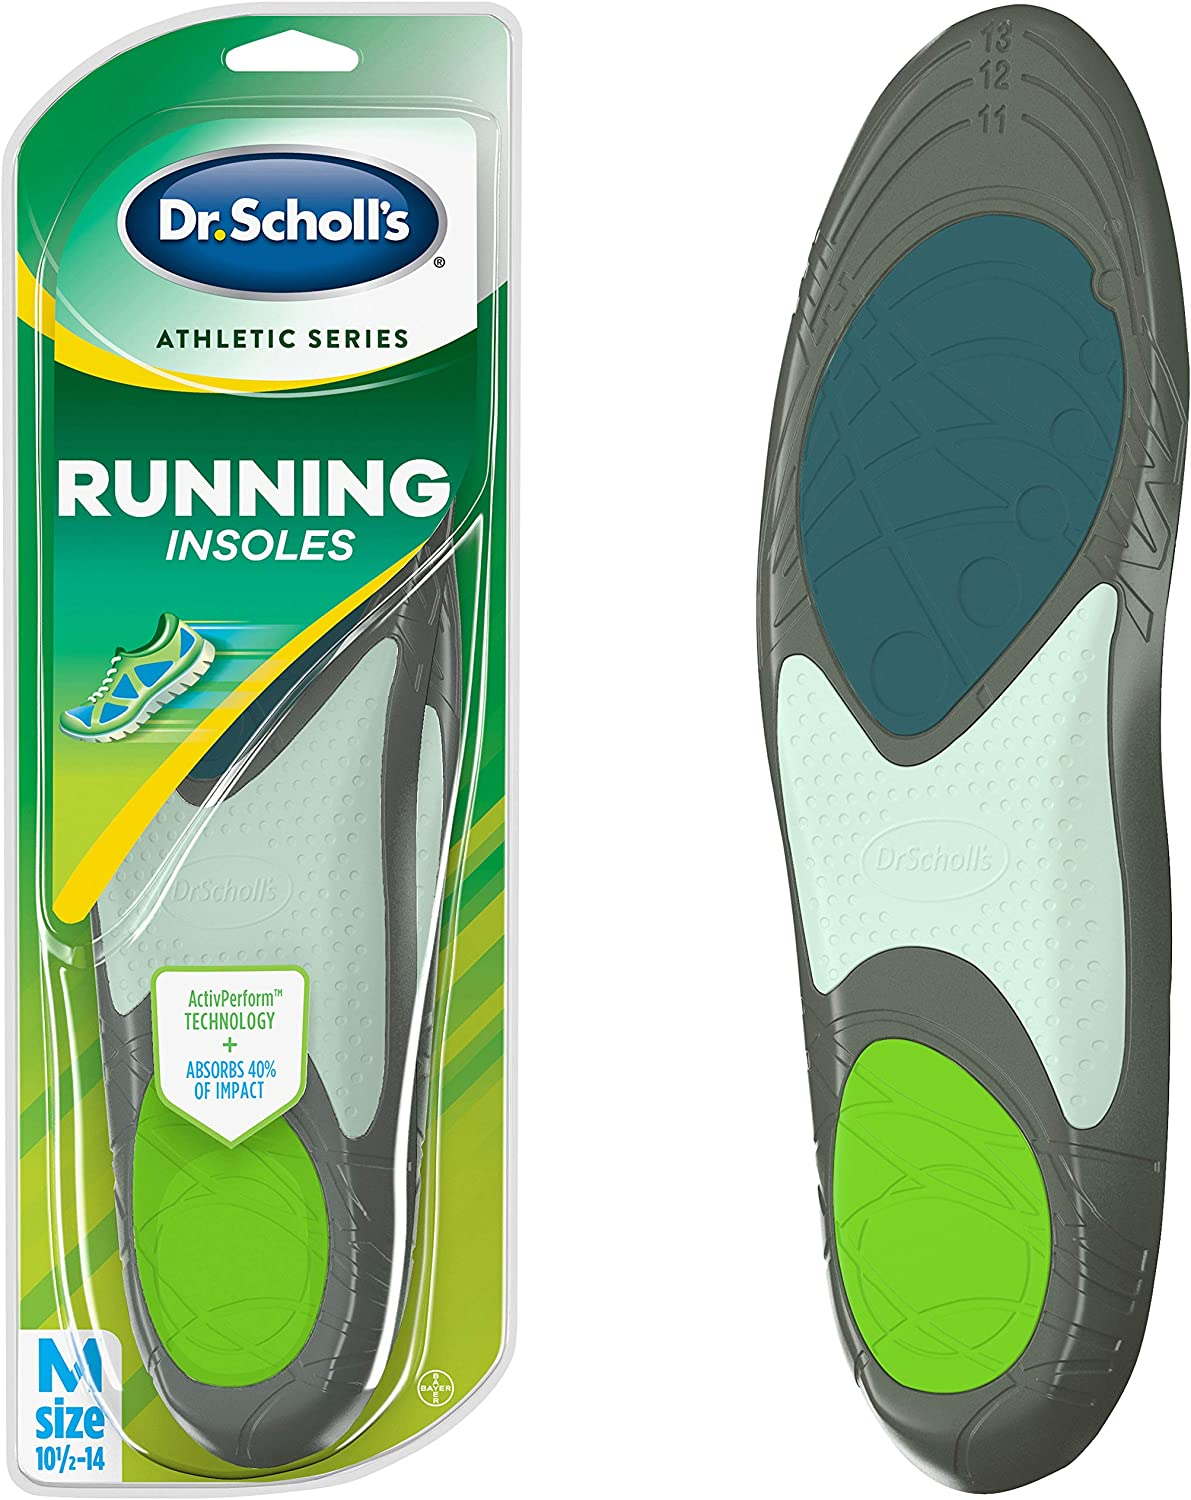 Dr. Scholl’s Running Insoles // Reduce Shock and Prevent Common Running Injuries: Runner's Knee, Plantar Fasciitis and Shin Splints, (Men's 10.5-14) $9.59